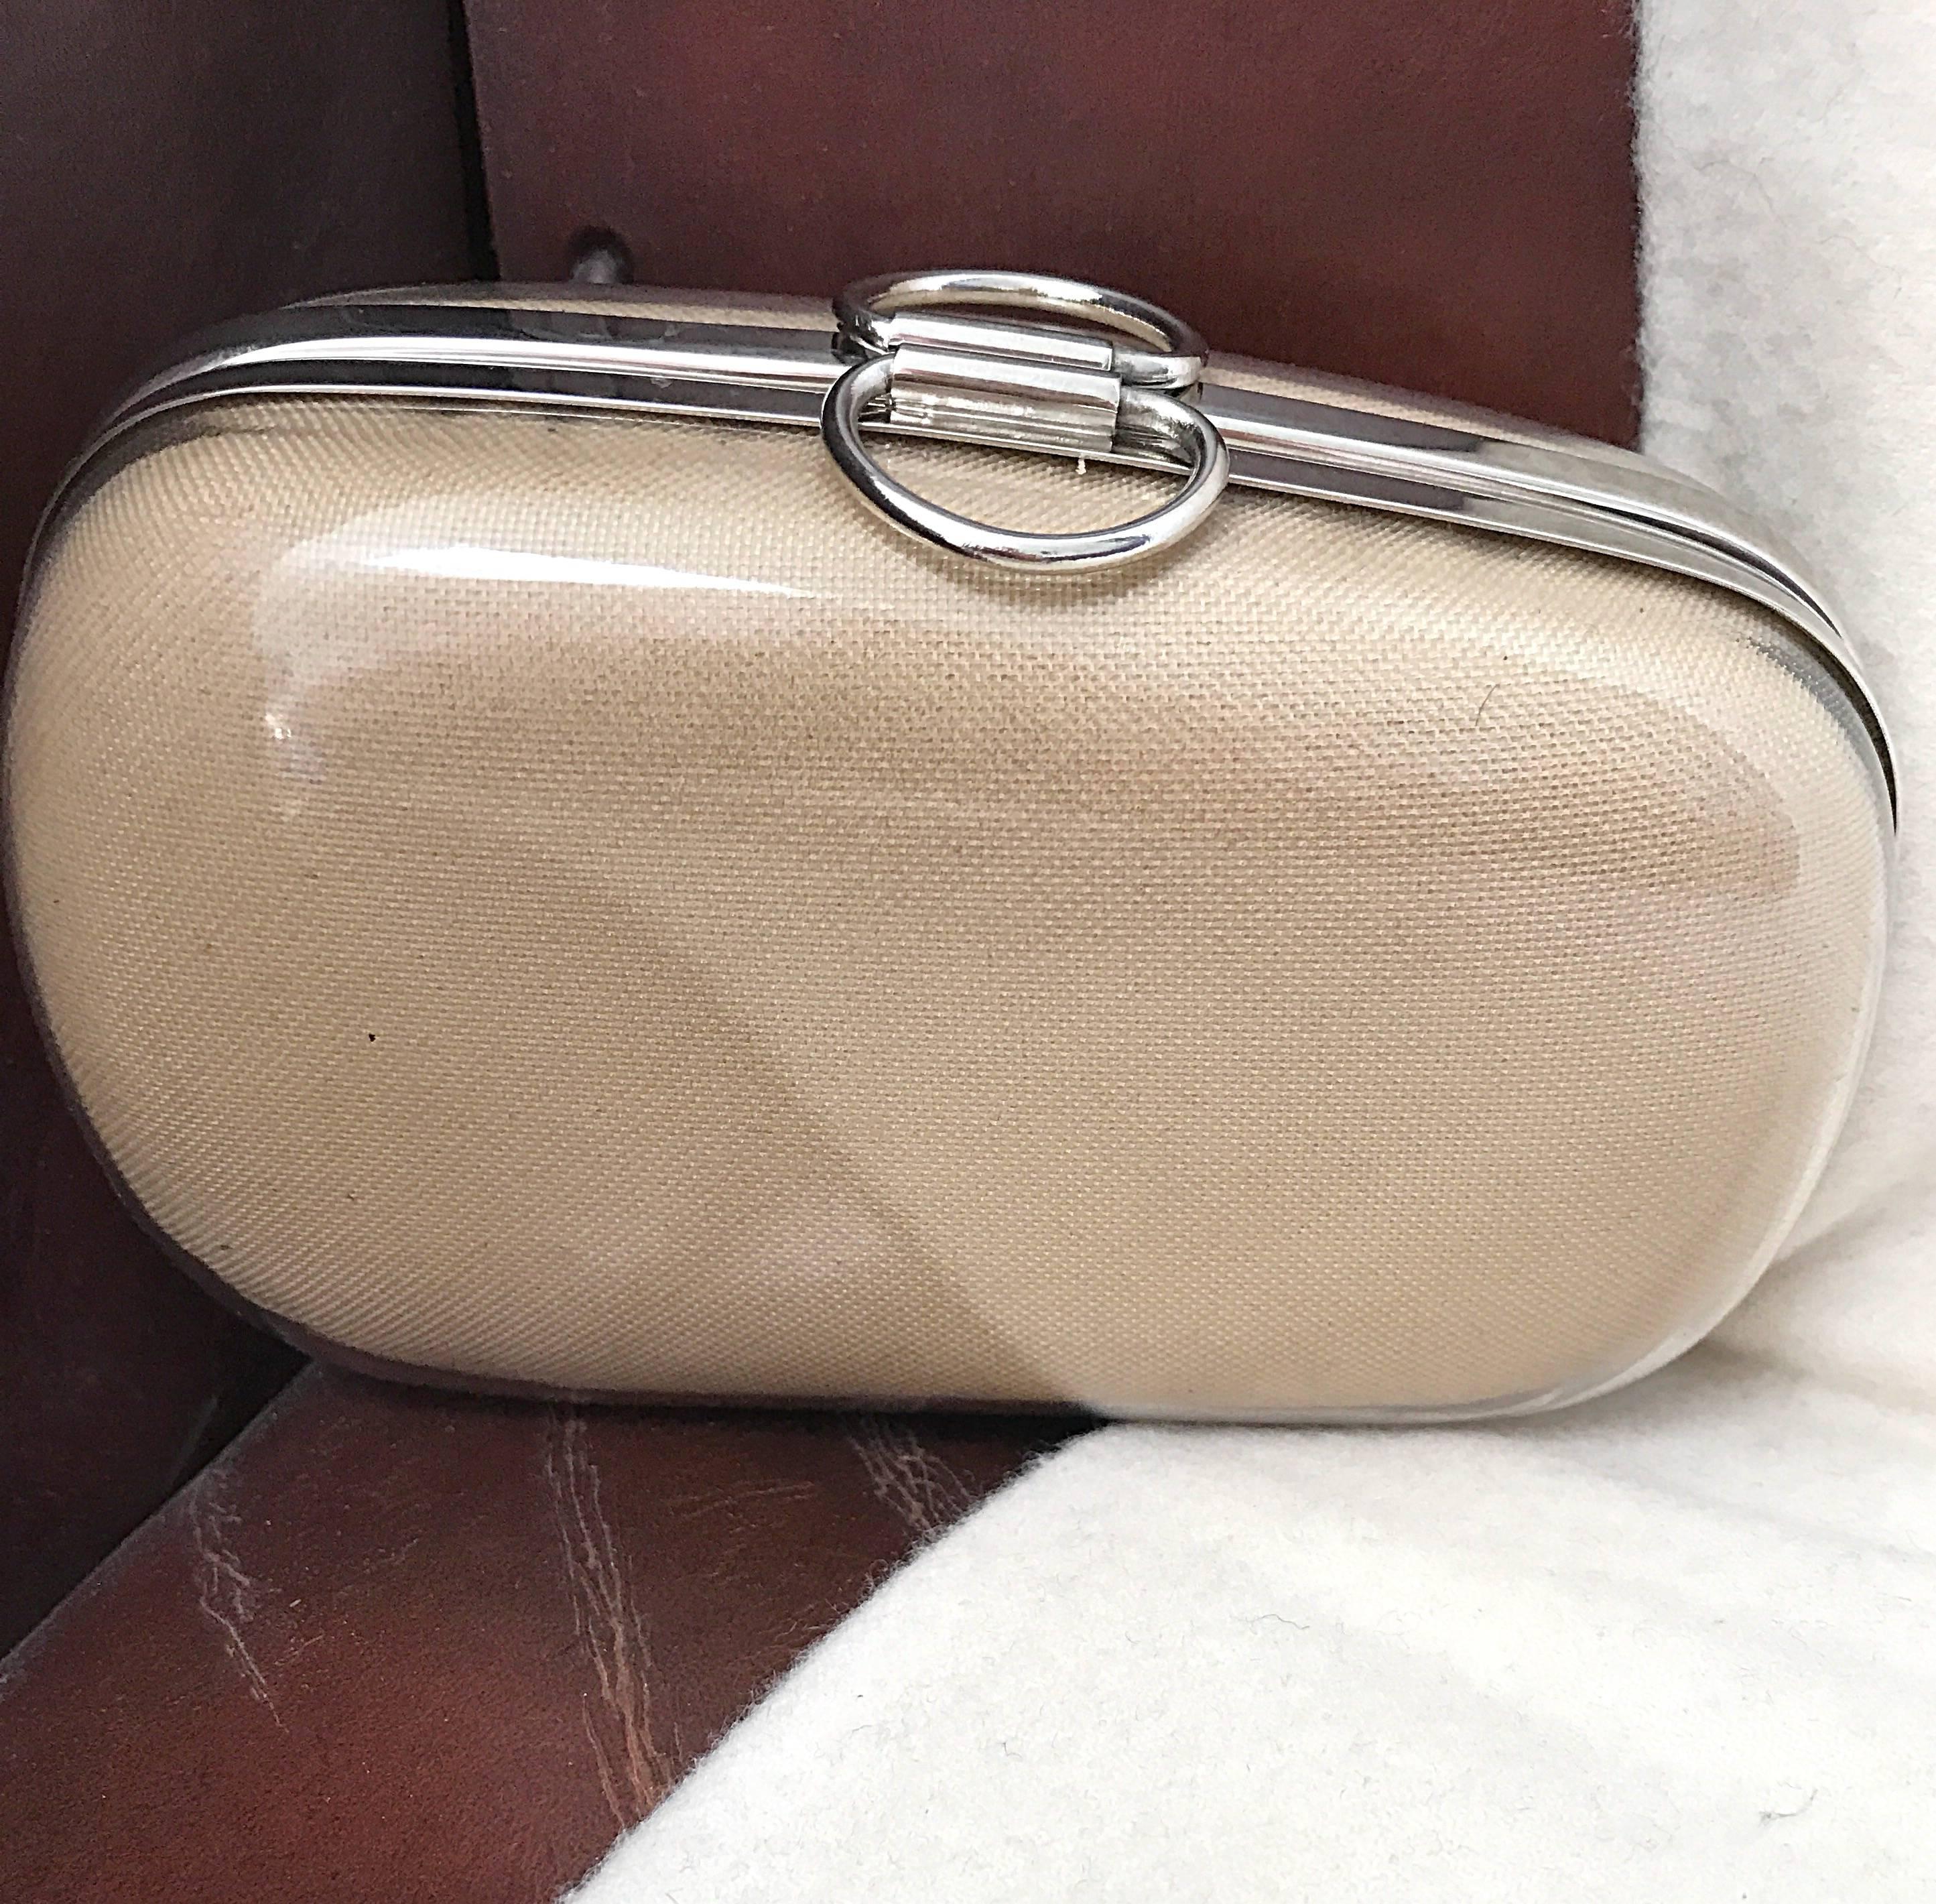 Super chic and rare early 90s ISAAC MIZRAHI nude khaki / tan plexiglass minaudiere clutch! Features the perfect nude tan linen and cotton blend, overlapped with a clear plexiglass. Asymmetrical shape, with two finger loops at top center..Can easily